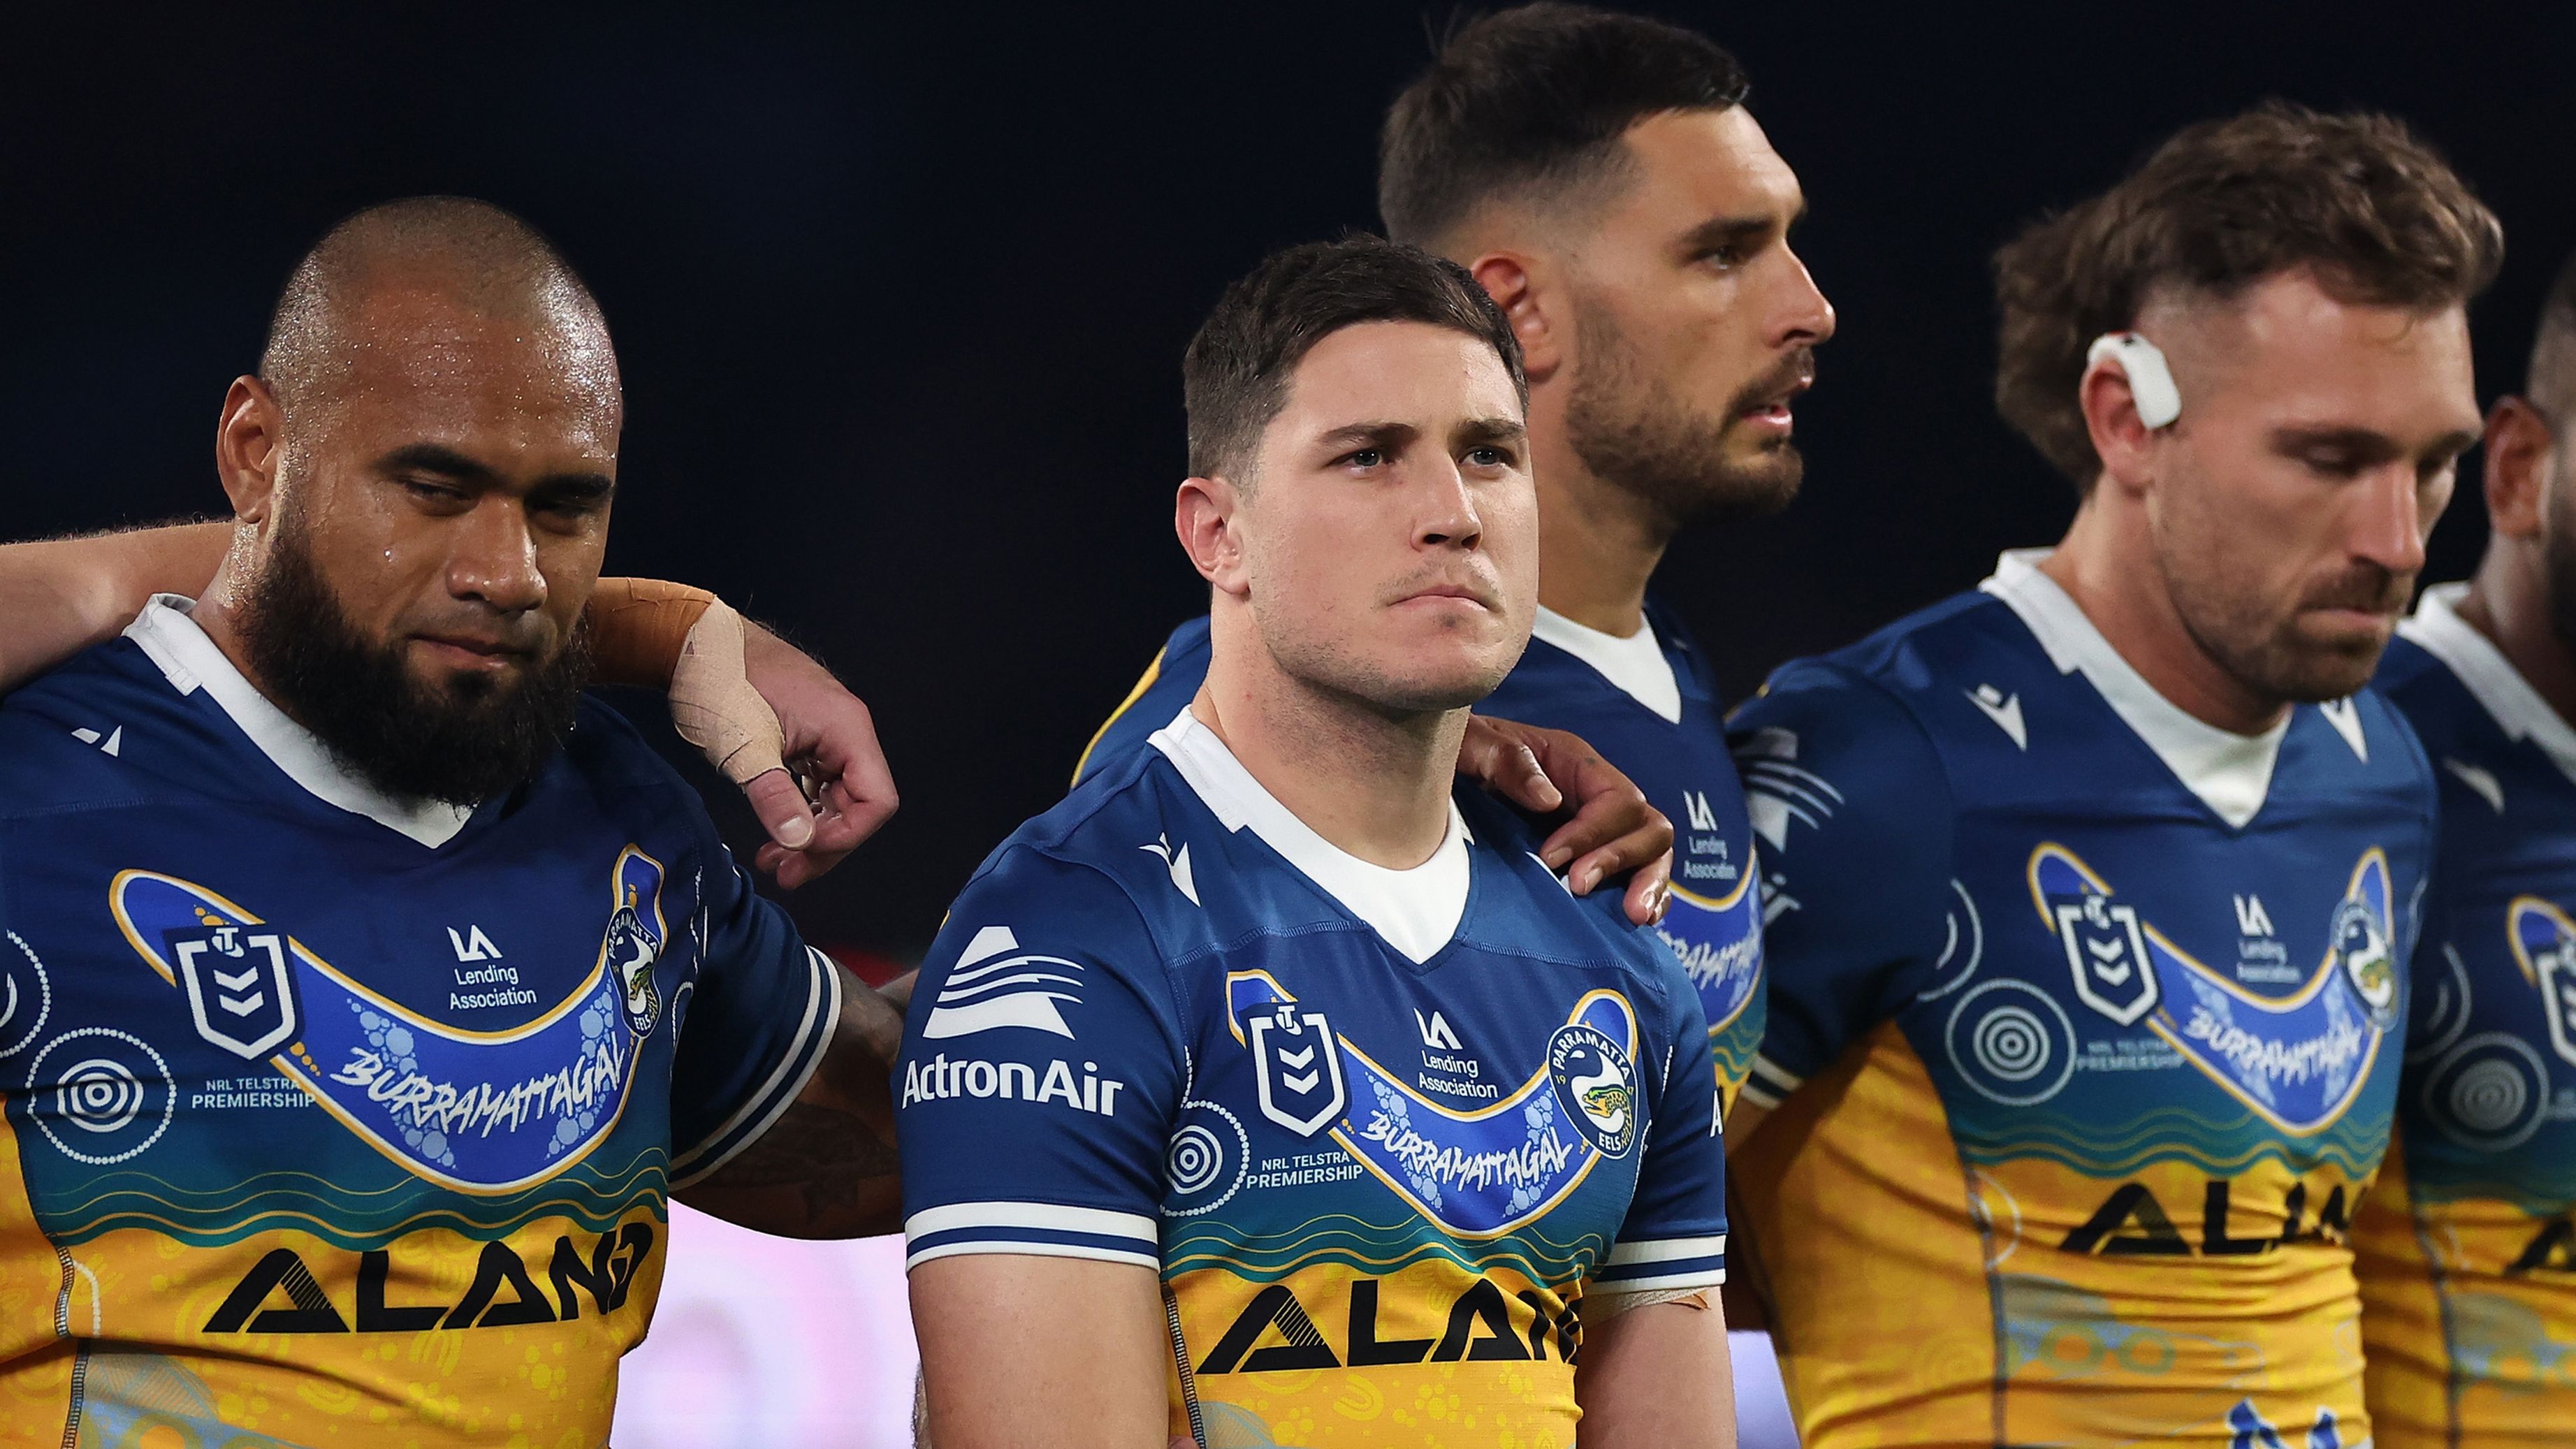 SYDNEY, AUSTRALIA - MAY 19: Mitchell Moses of the Eels and team mates line up during the round 12 NRL match between South Sydney Rabbitohs and Parramatta Eels at Allianz Stadium on May 19, 2023 in Sydney, Australia. (Photo by Cameron Spencer/Getty Images)